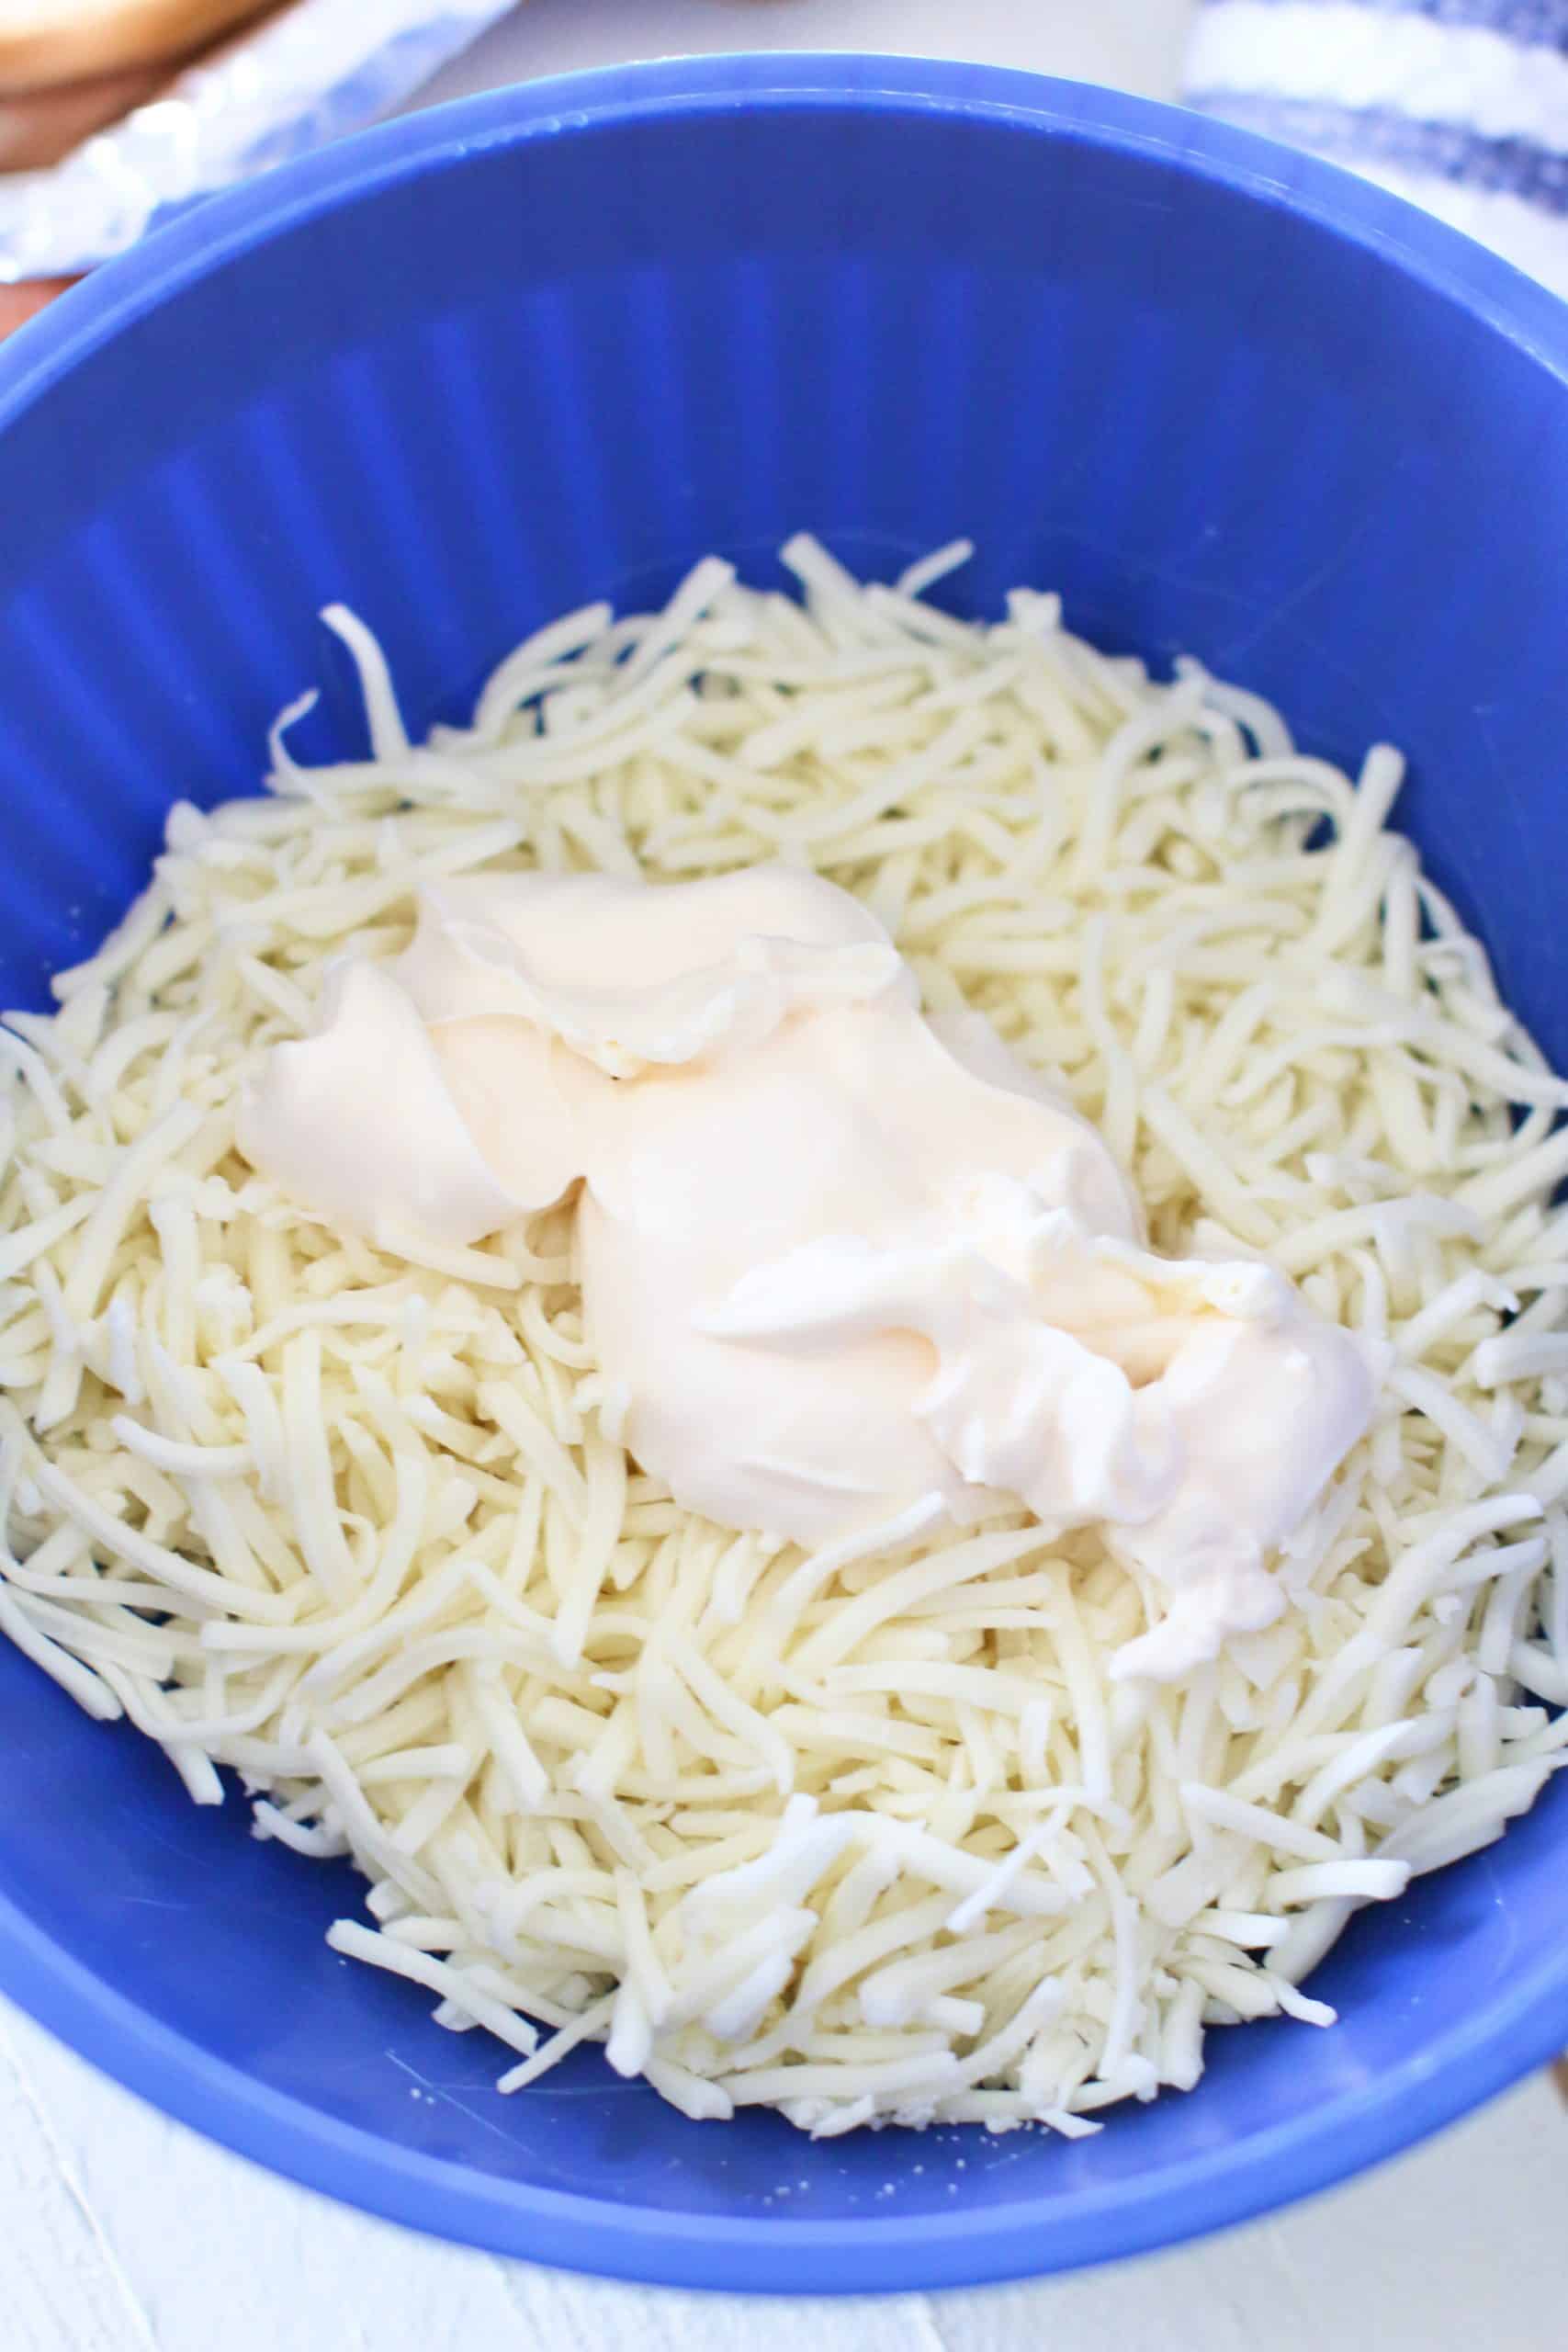 mayonnaise and shredded mozzarella cheese shown in a blue bowl.